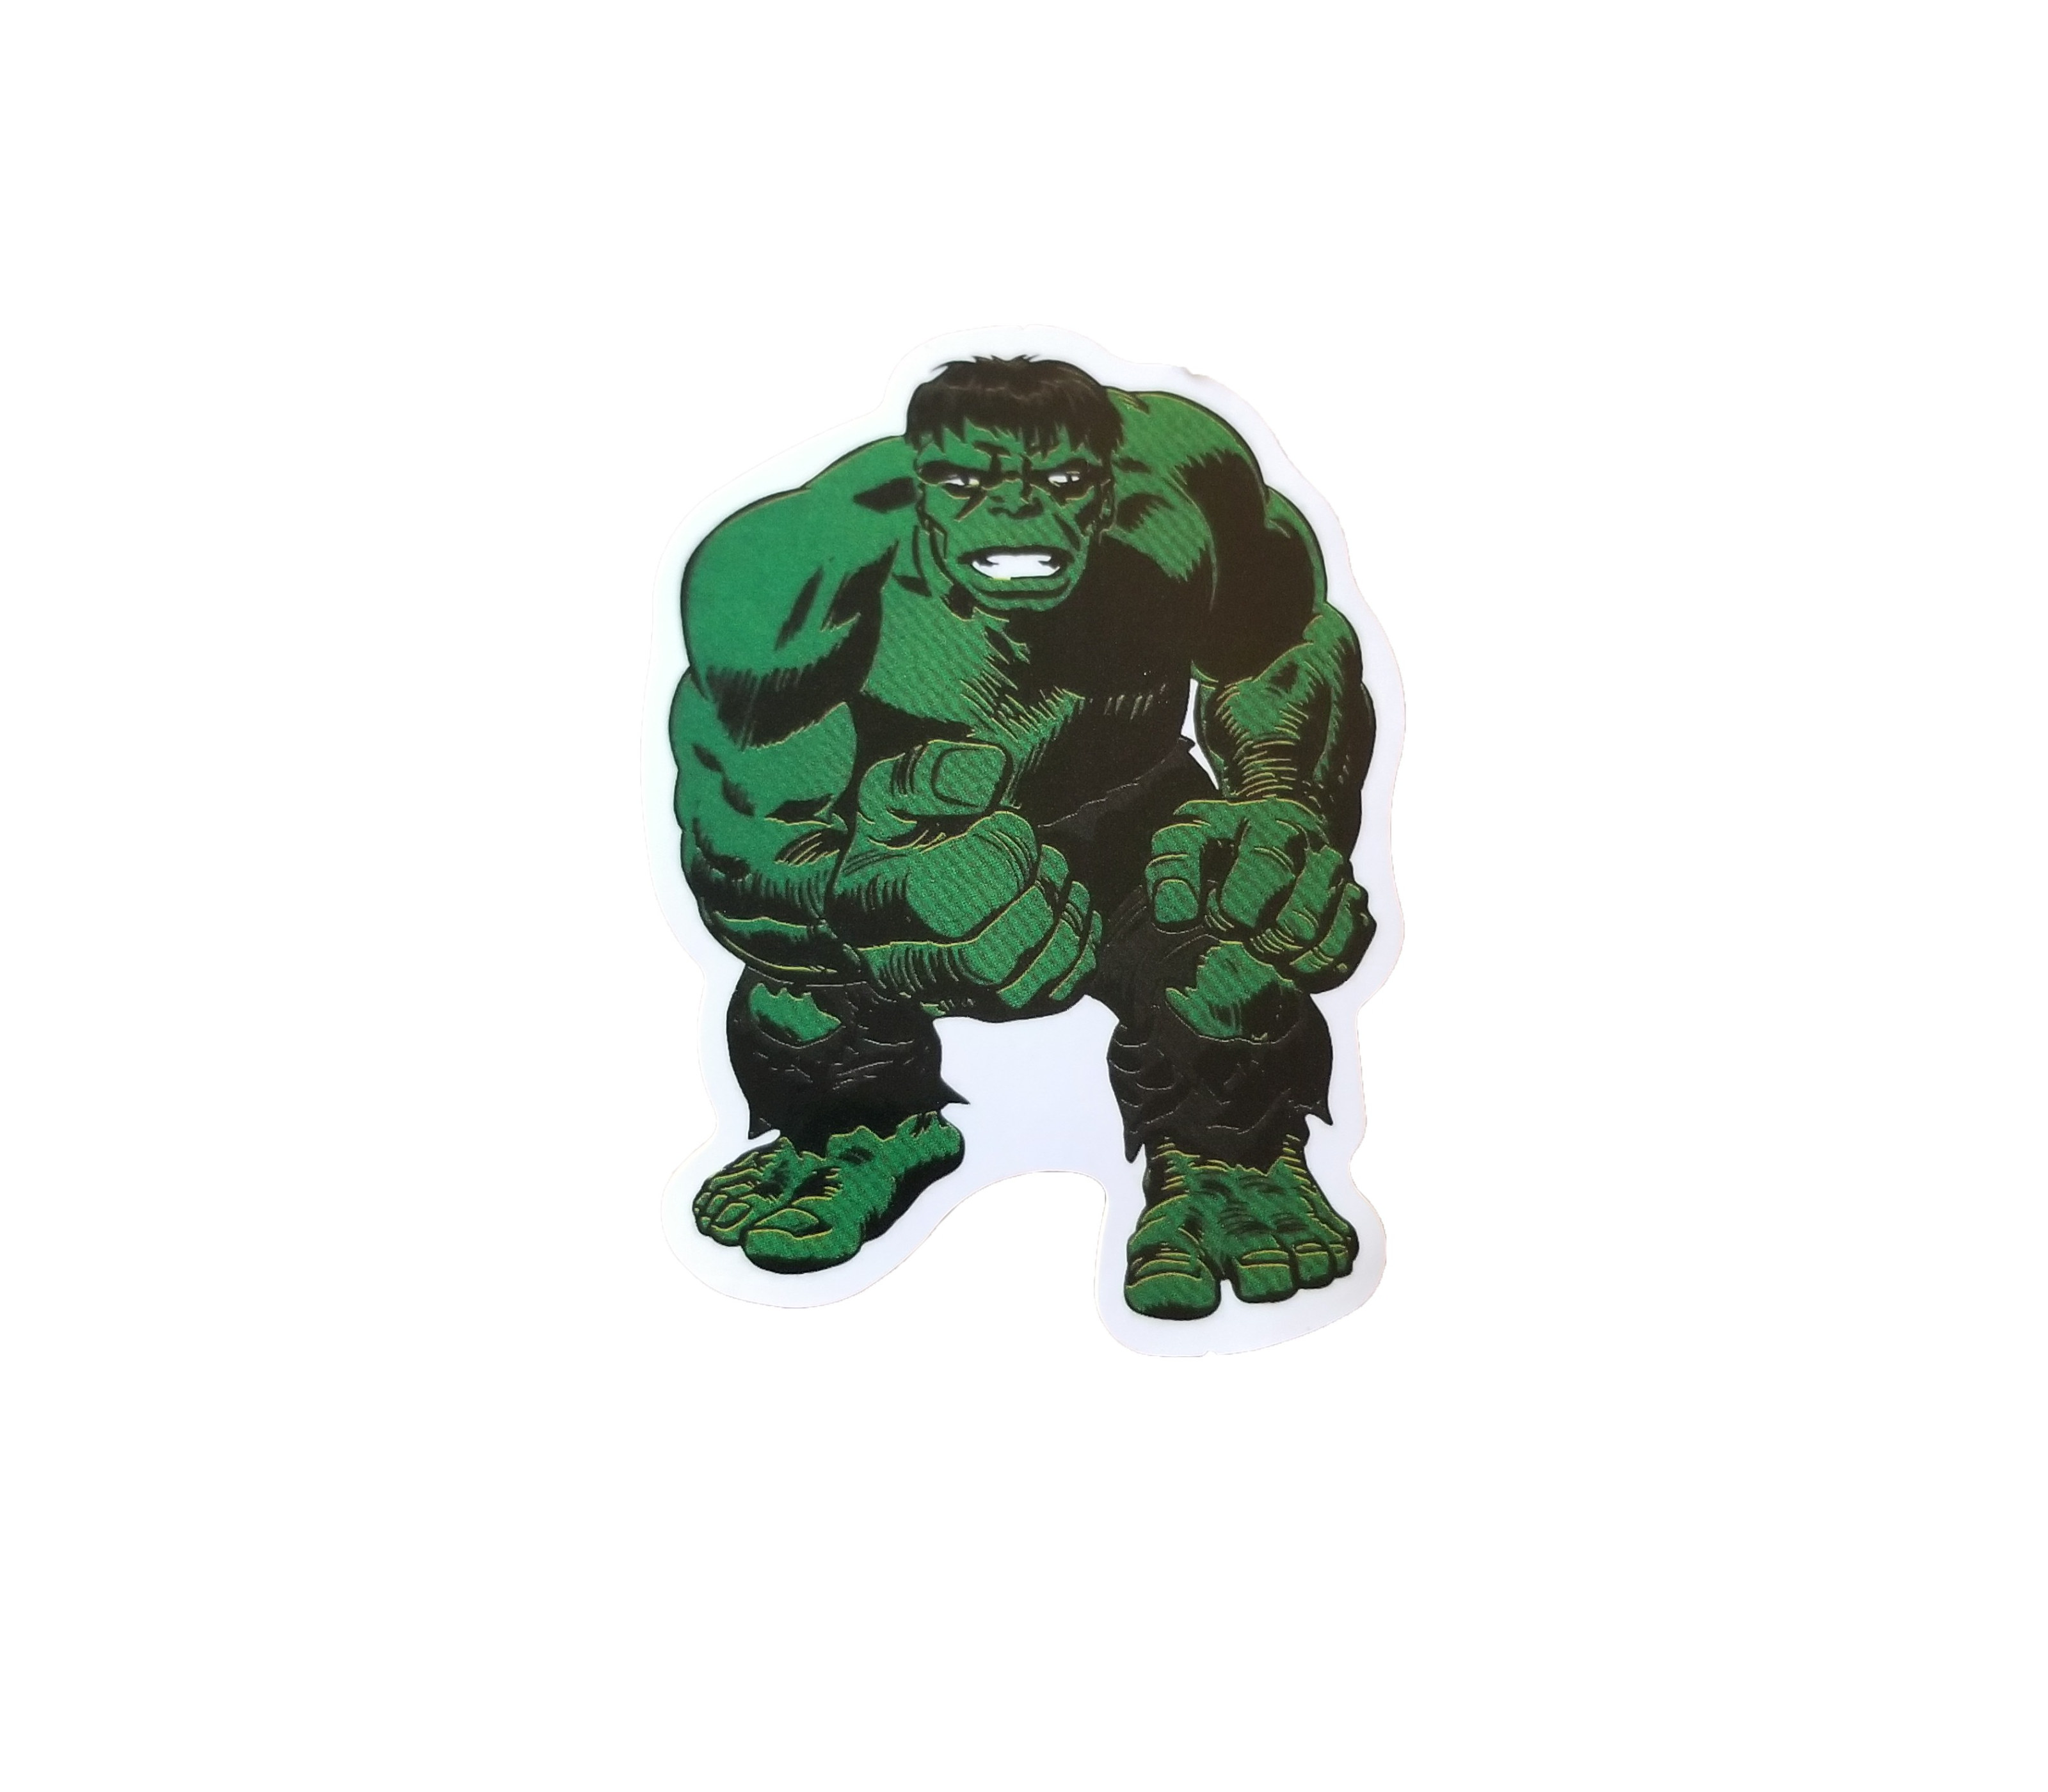 hulk crouching and looking mad and ready to smash something